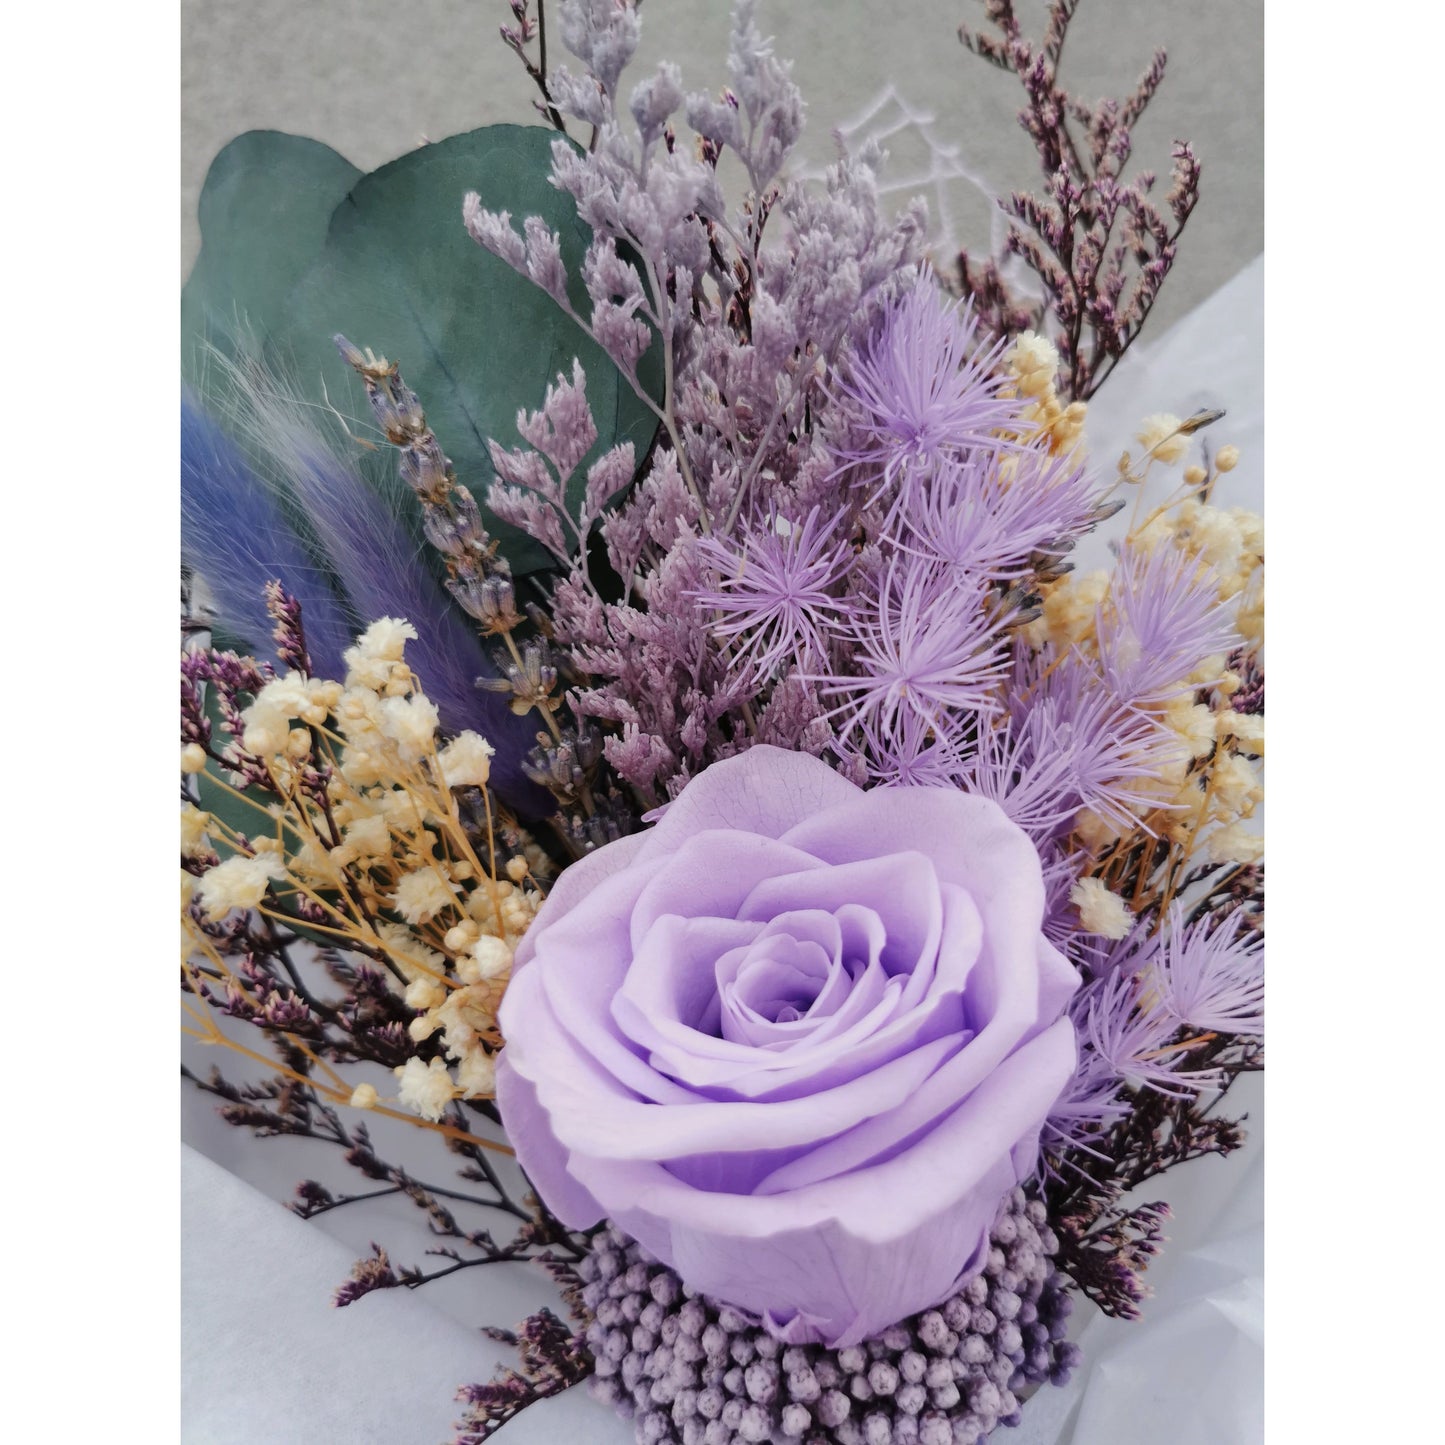 Small bunch of dried & preserved flowers in purple shades, green & cream and featuring a preserved purple rose. Wrapped ready for gifting. Pic shows bunch held up against a wall with a full close up of the flowers